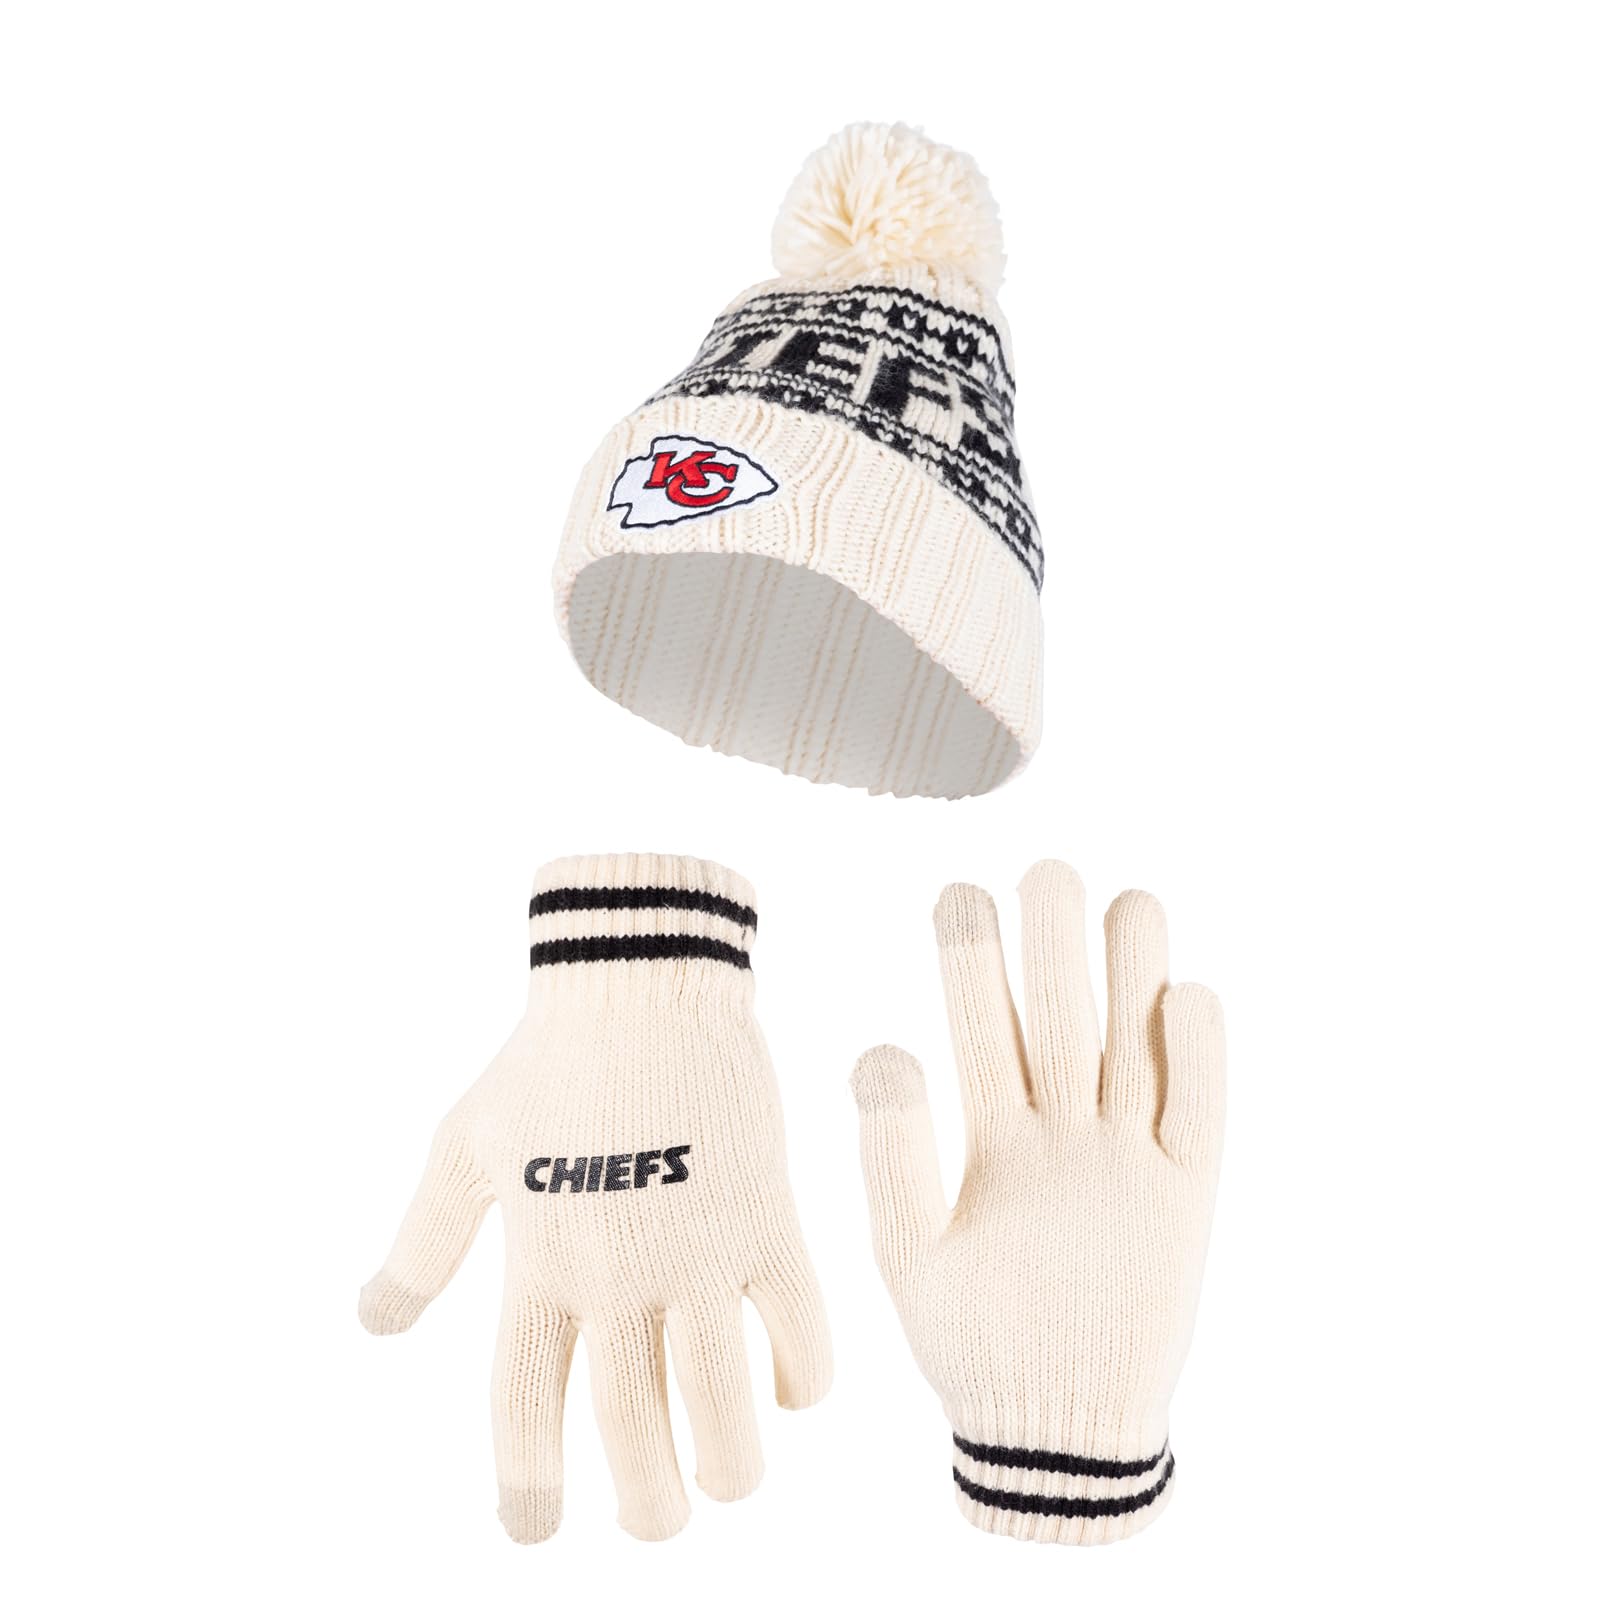 Ultra Game NFL Kansas City Chiefs Womens Super Soft Cable Knit Winter Beanie Knit Hat with Extra Warm Touch Screen Gloves|Kansas City Chiefs